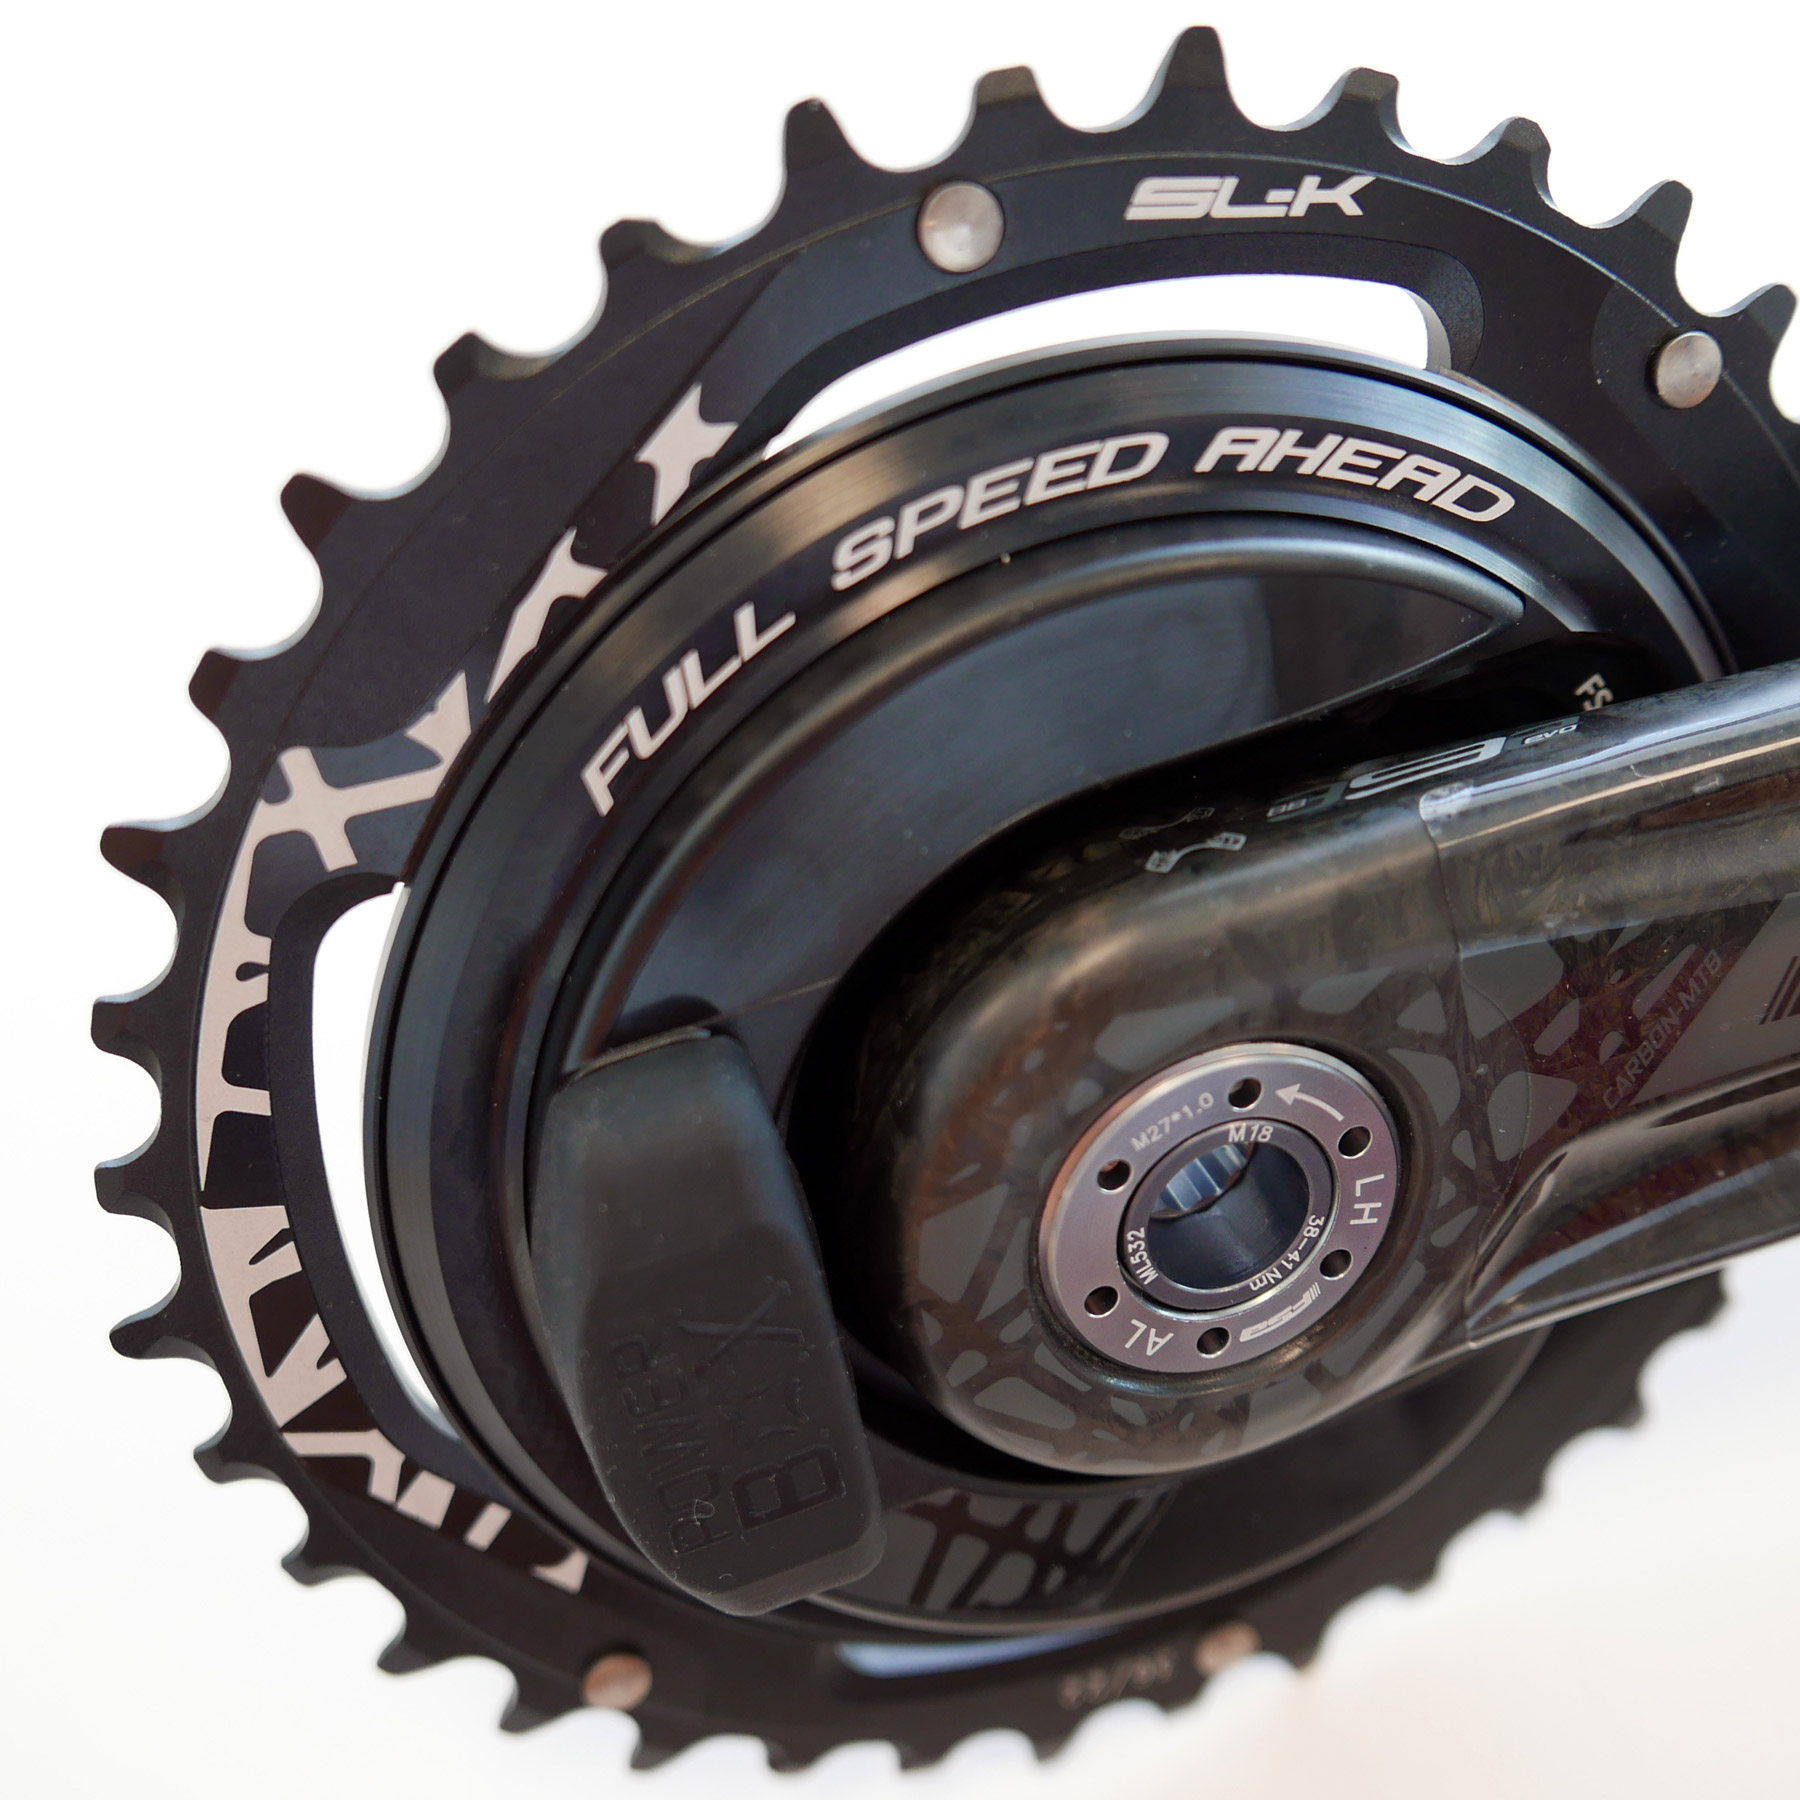 EB16: FSA PowerBox launches power meter cranks developed with Power2Max